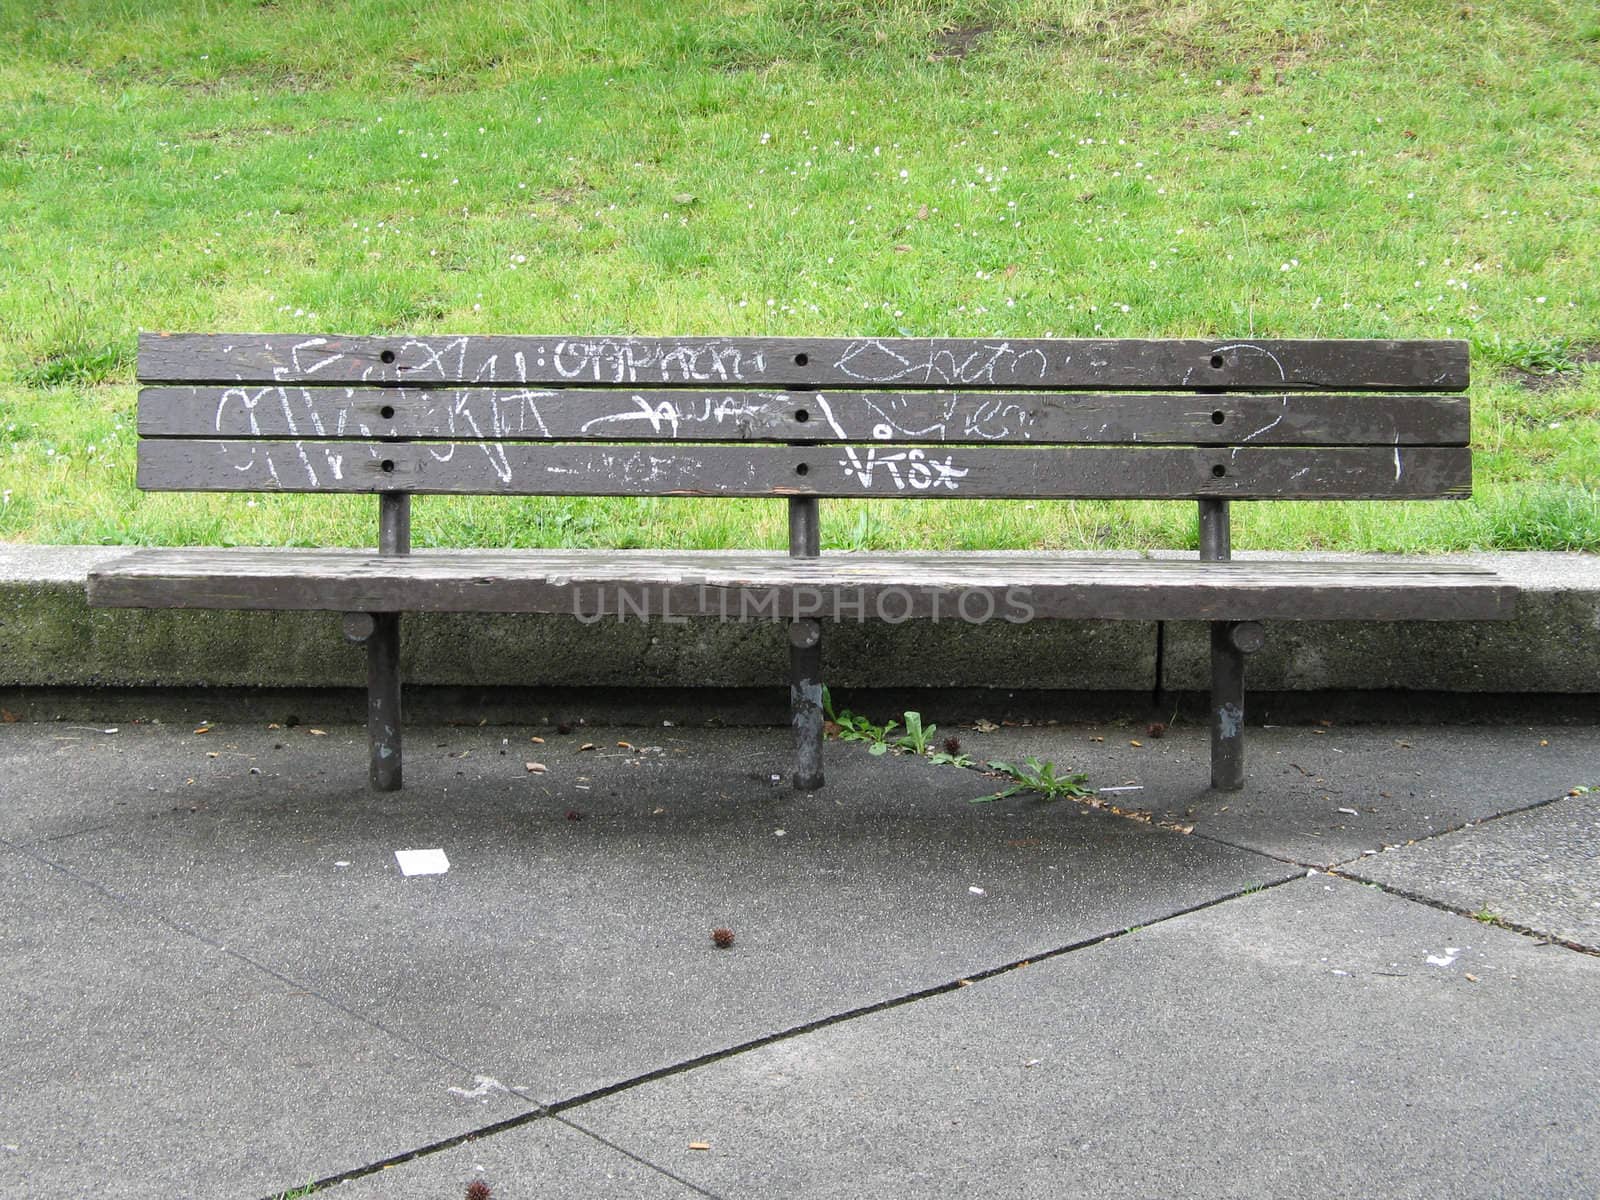 old park bench